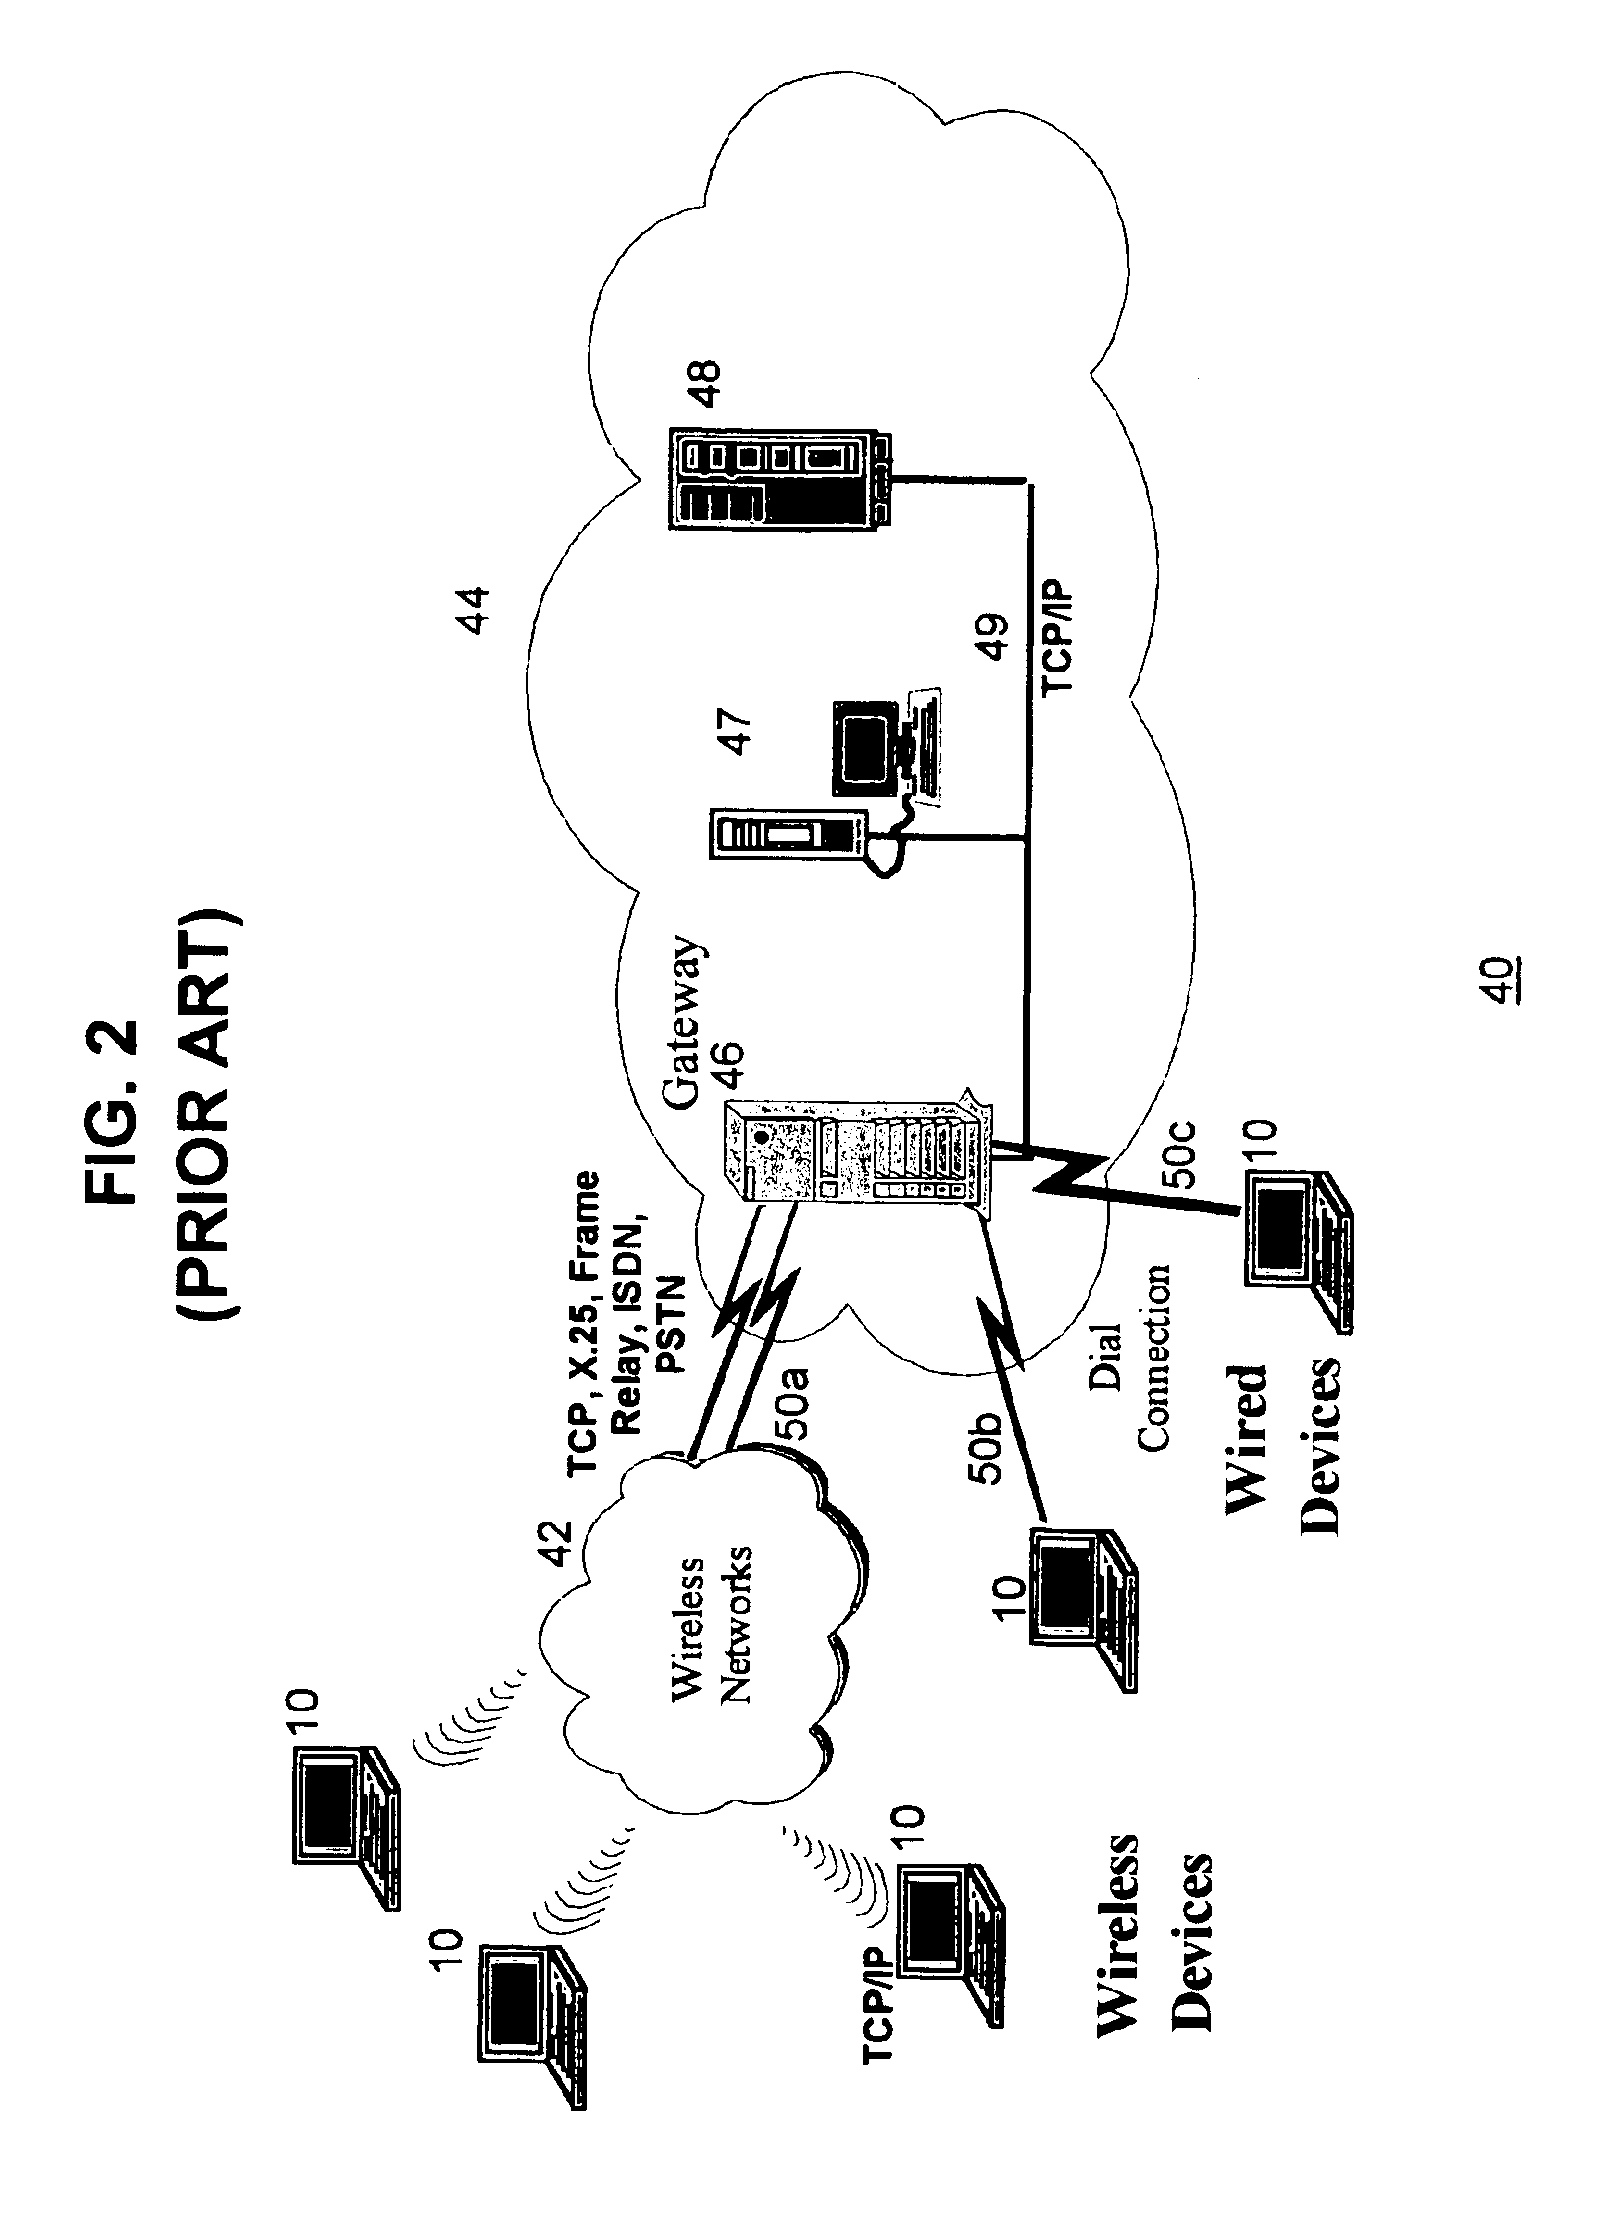 System for incrementally computing the maximum cost extension allowable for subsequent execution of each task using fixed percentage of the associated cost